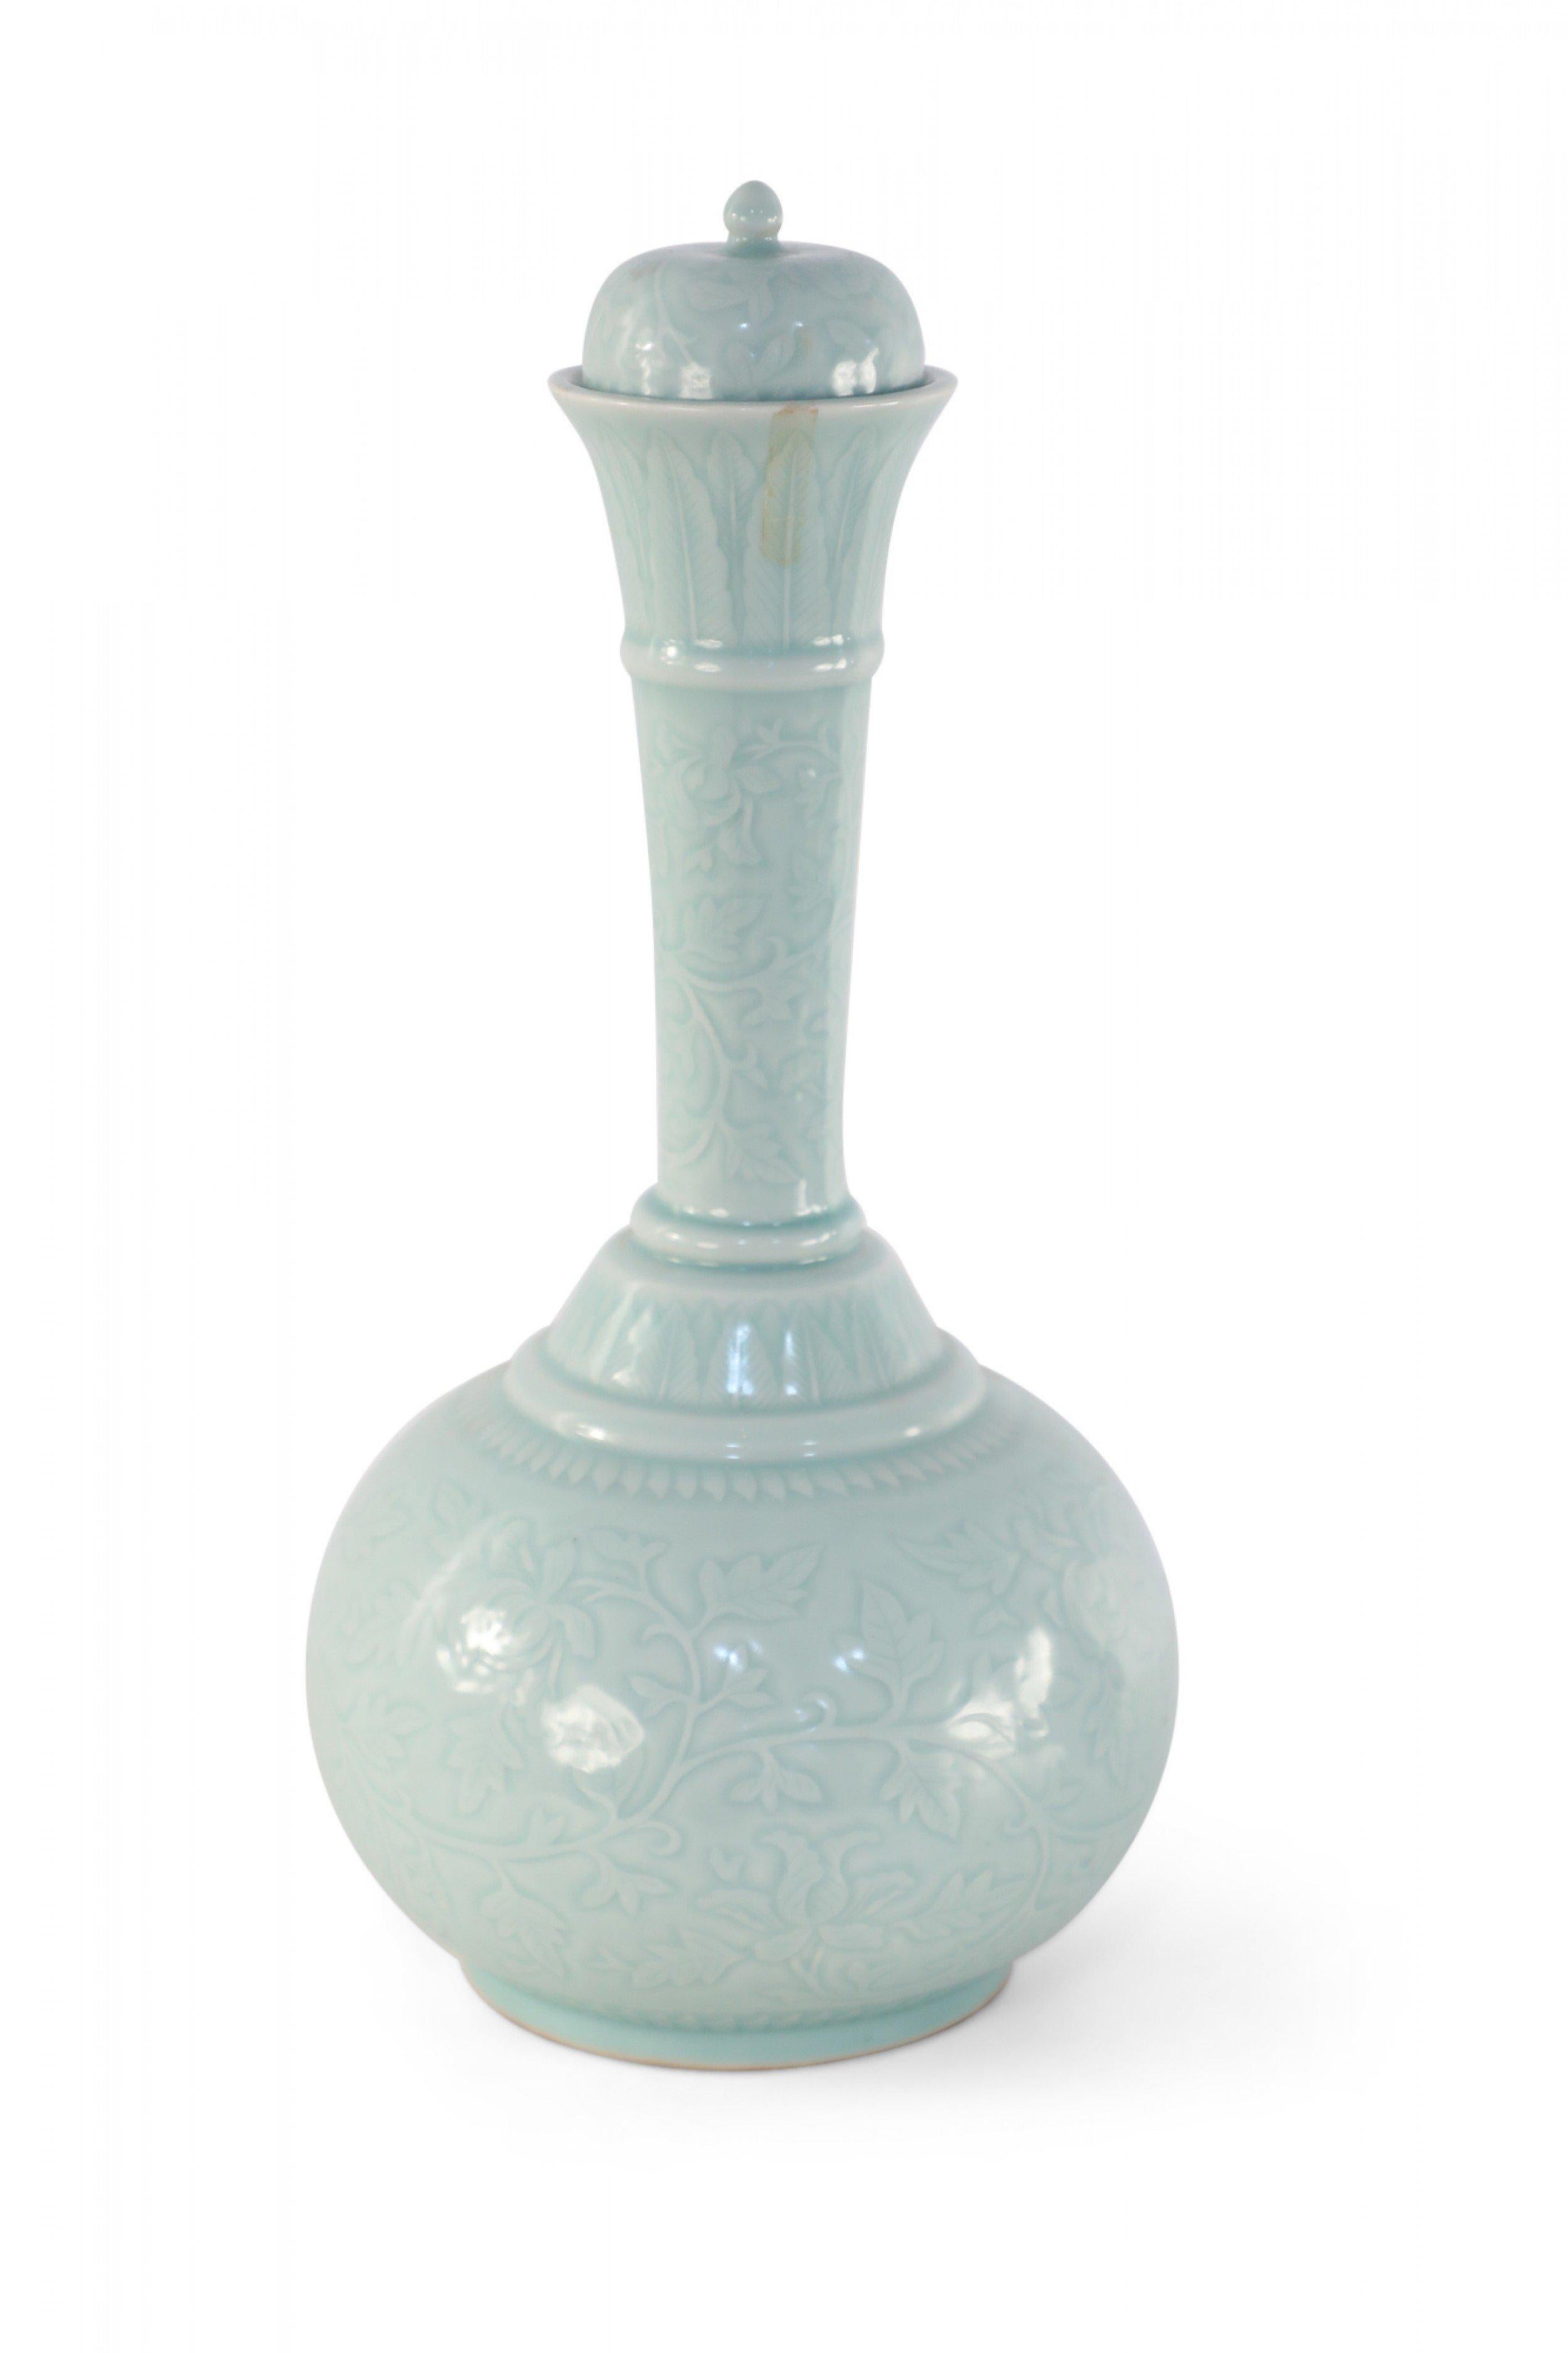 20th Century Chinese celadon ceramic vase with a gourd-shaped form wrapped in a tonal vine pattern and fitted with a ball finial-topped lid. 
  